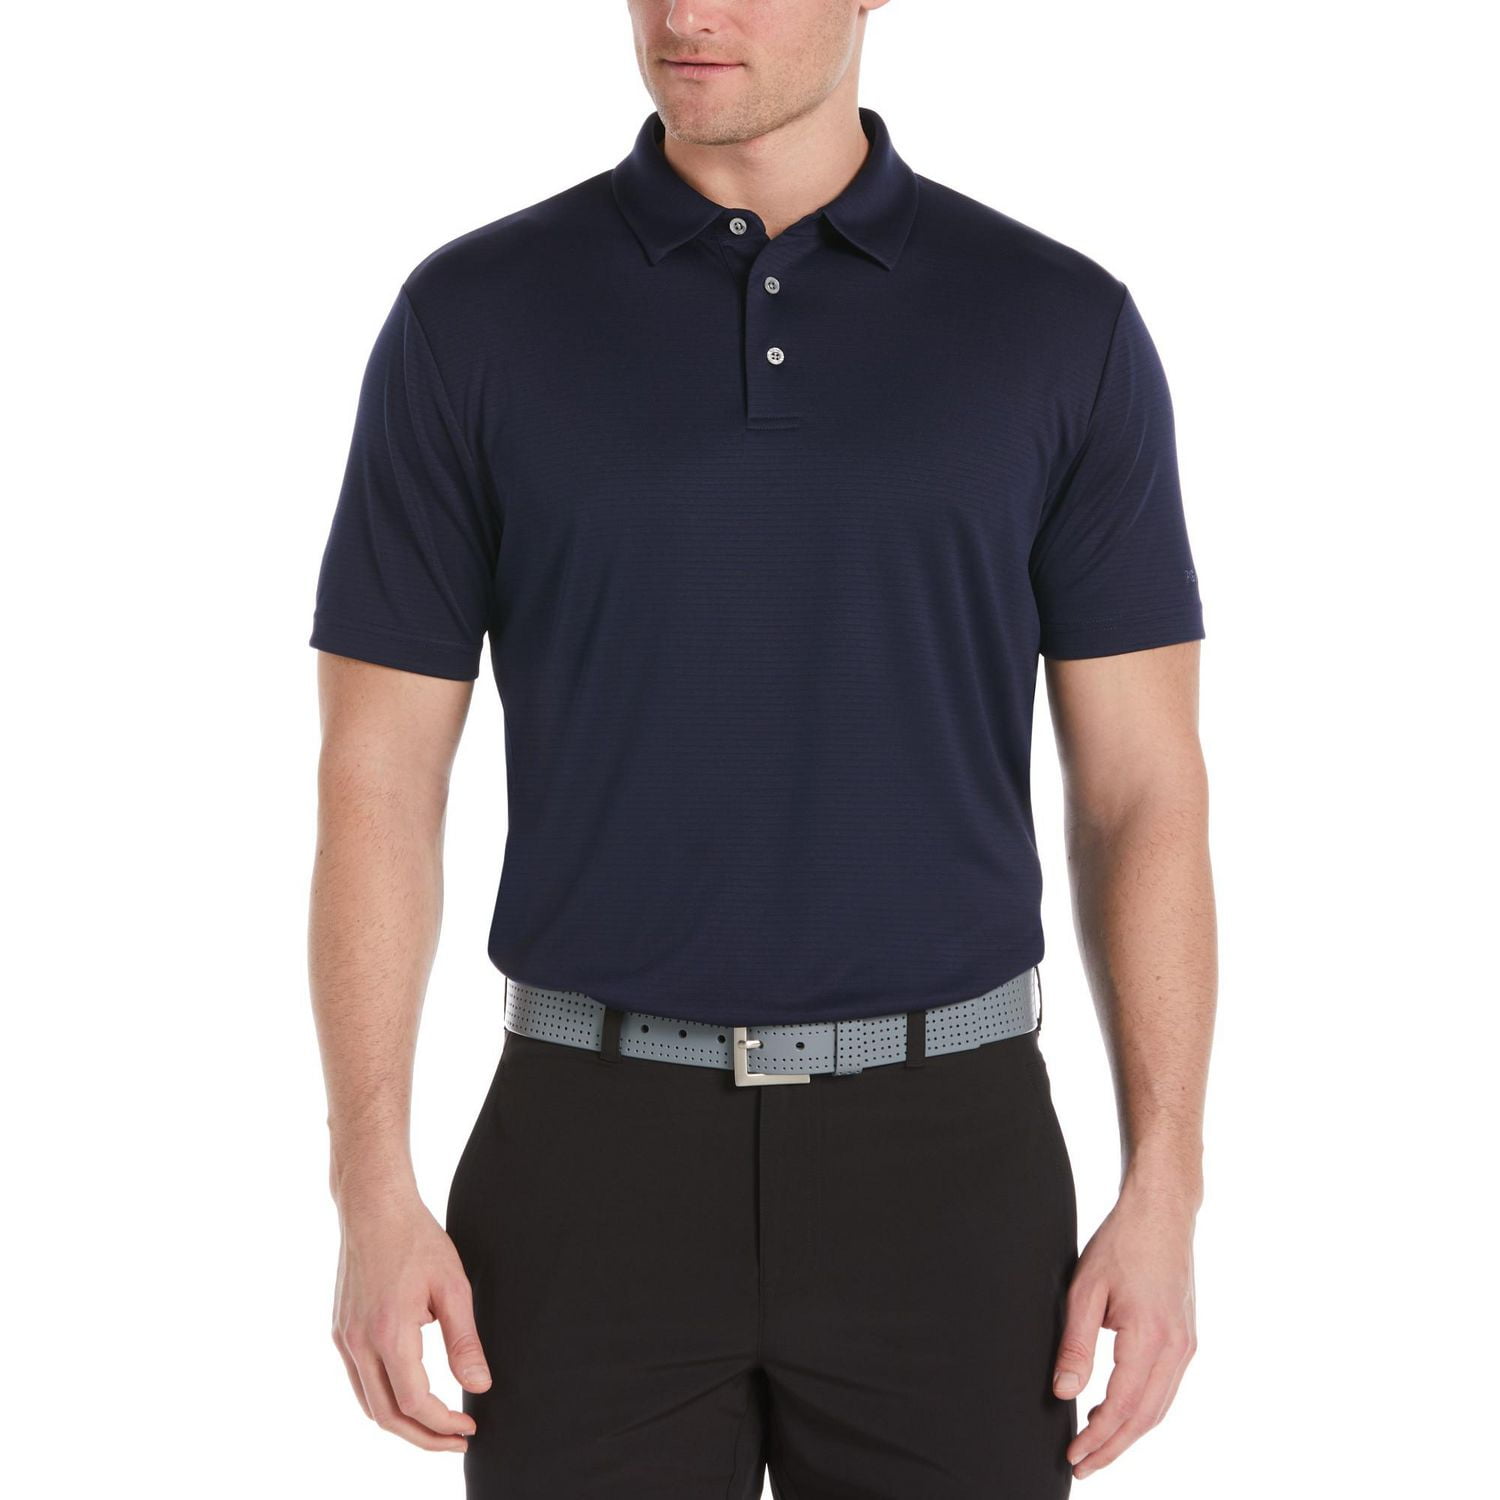 COBY STEVENS PERFORMANCE SUPER COMFY GOLF POLO SHIRT CHOOSE COLOR AND SIZE